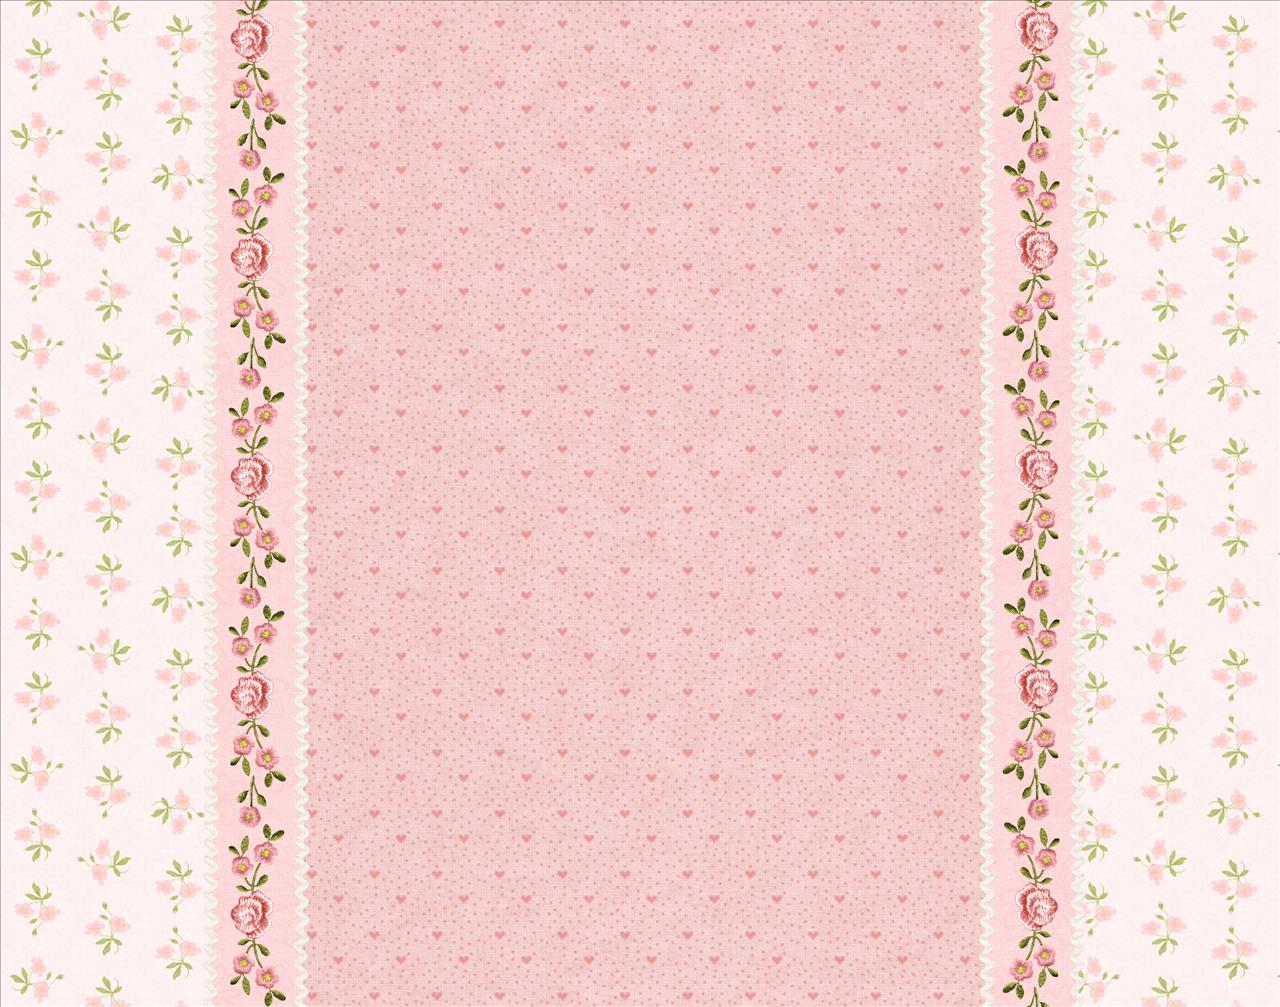 Hearts and Rose Frame Backgrounds